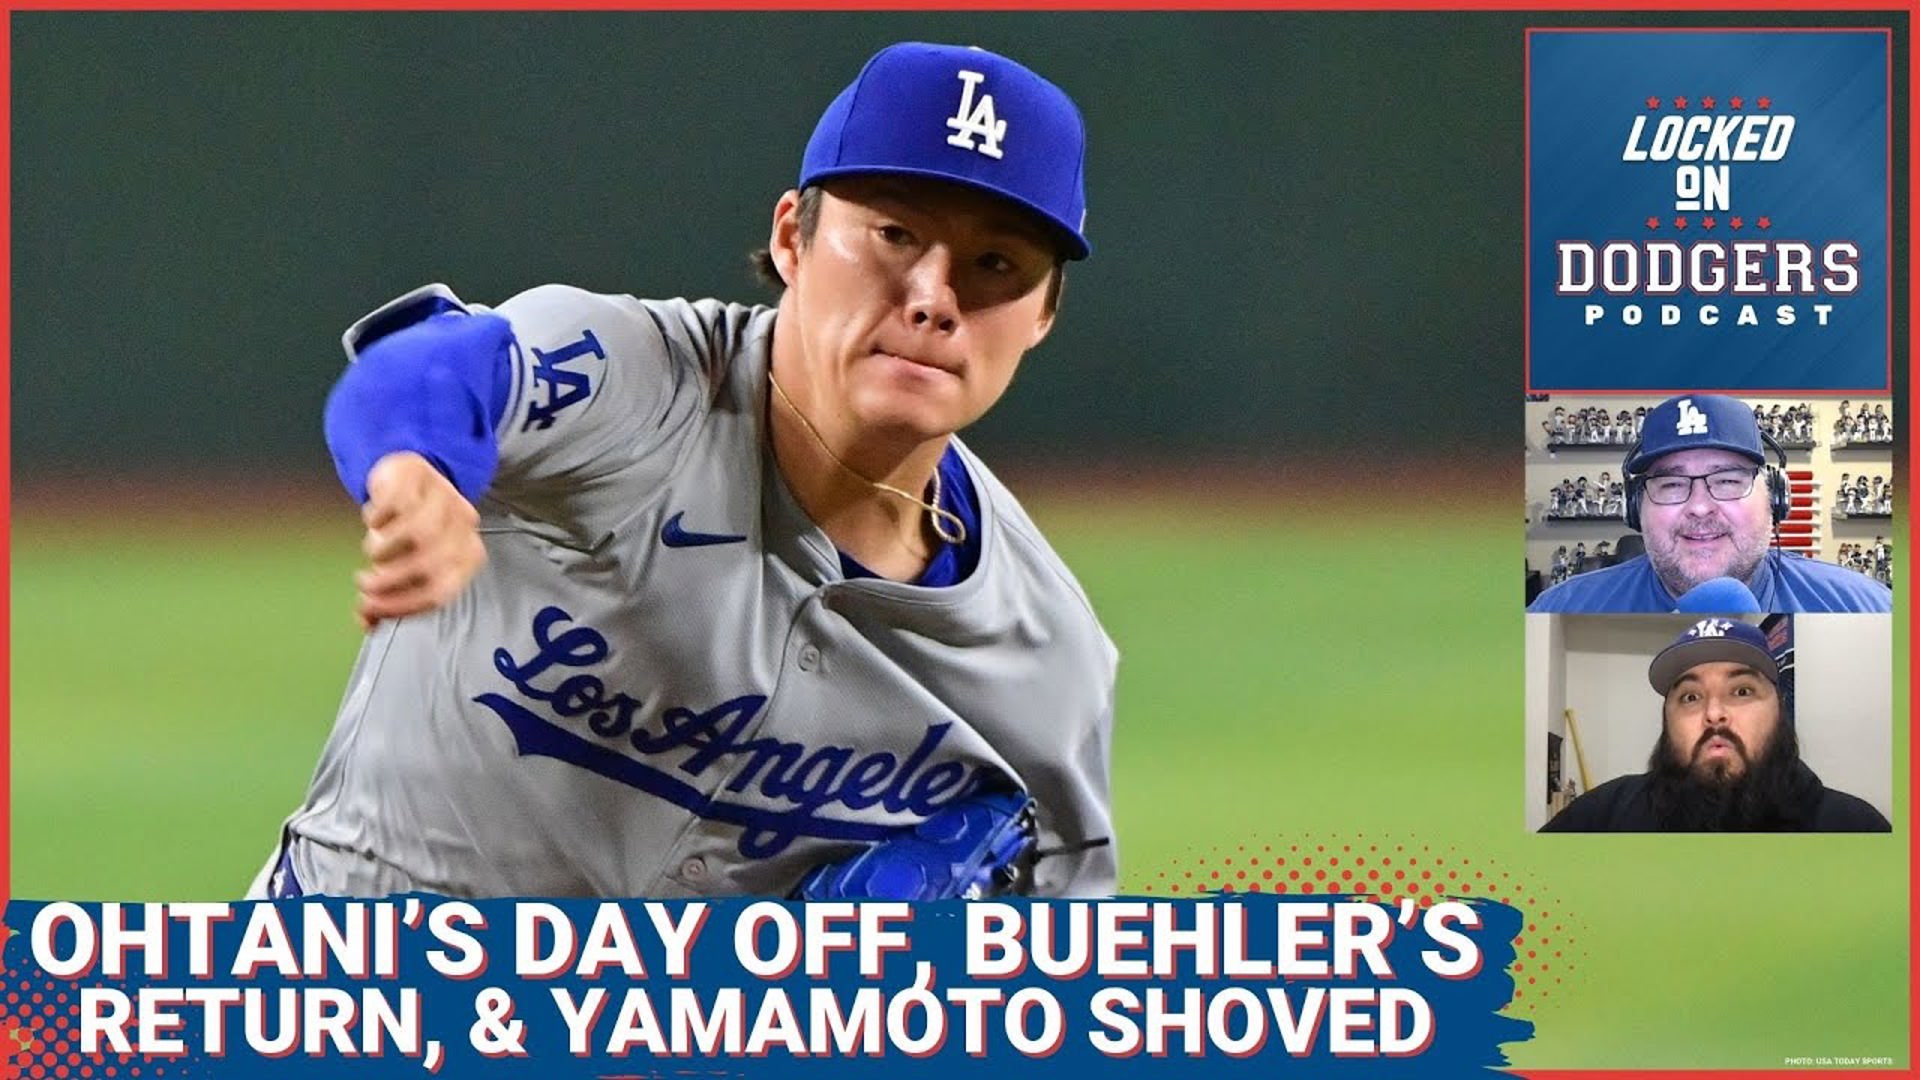 The Dodgers took the series from the DBacks with a dominating 8-0 win on Wednesday. Shohei Ohtani received a day off but the offense was there to pick him up